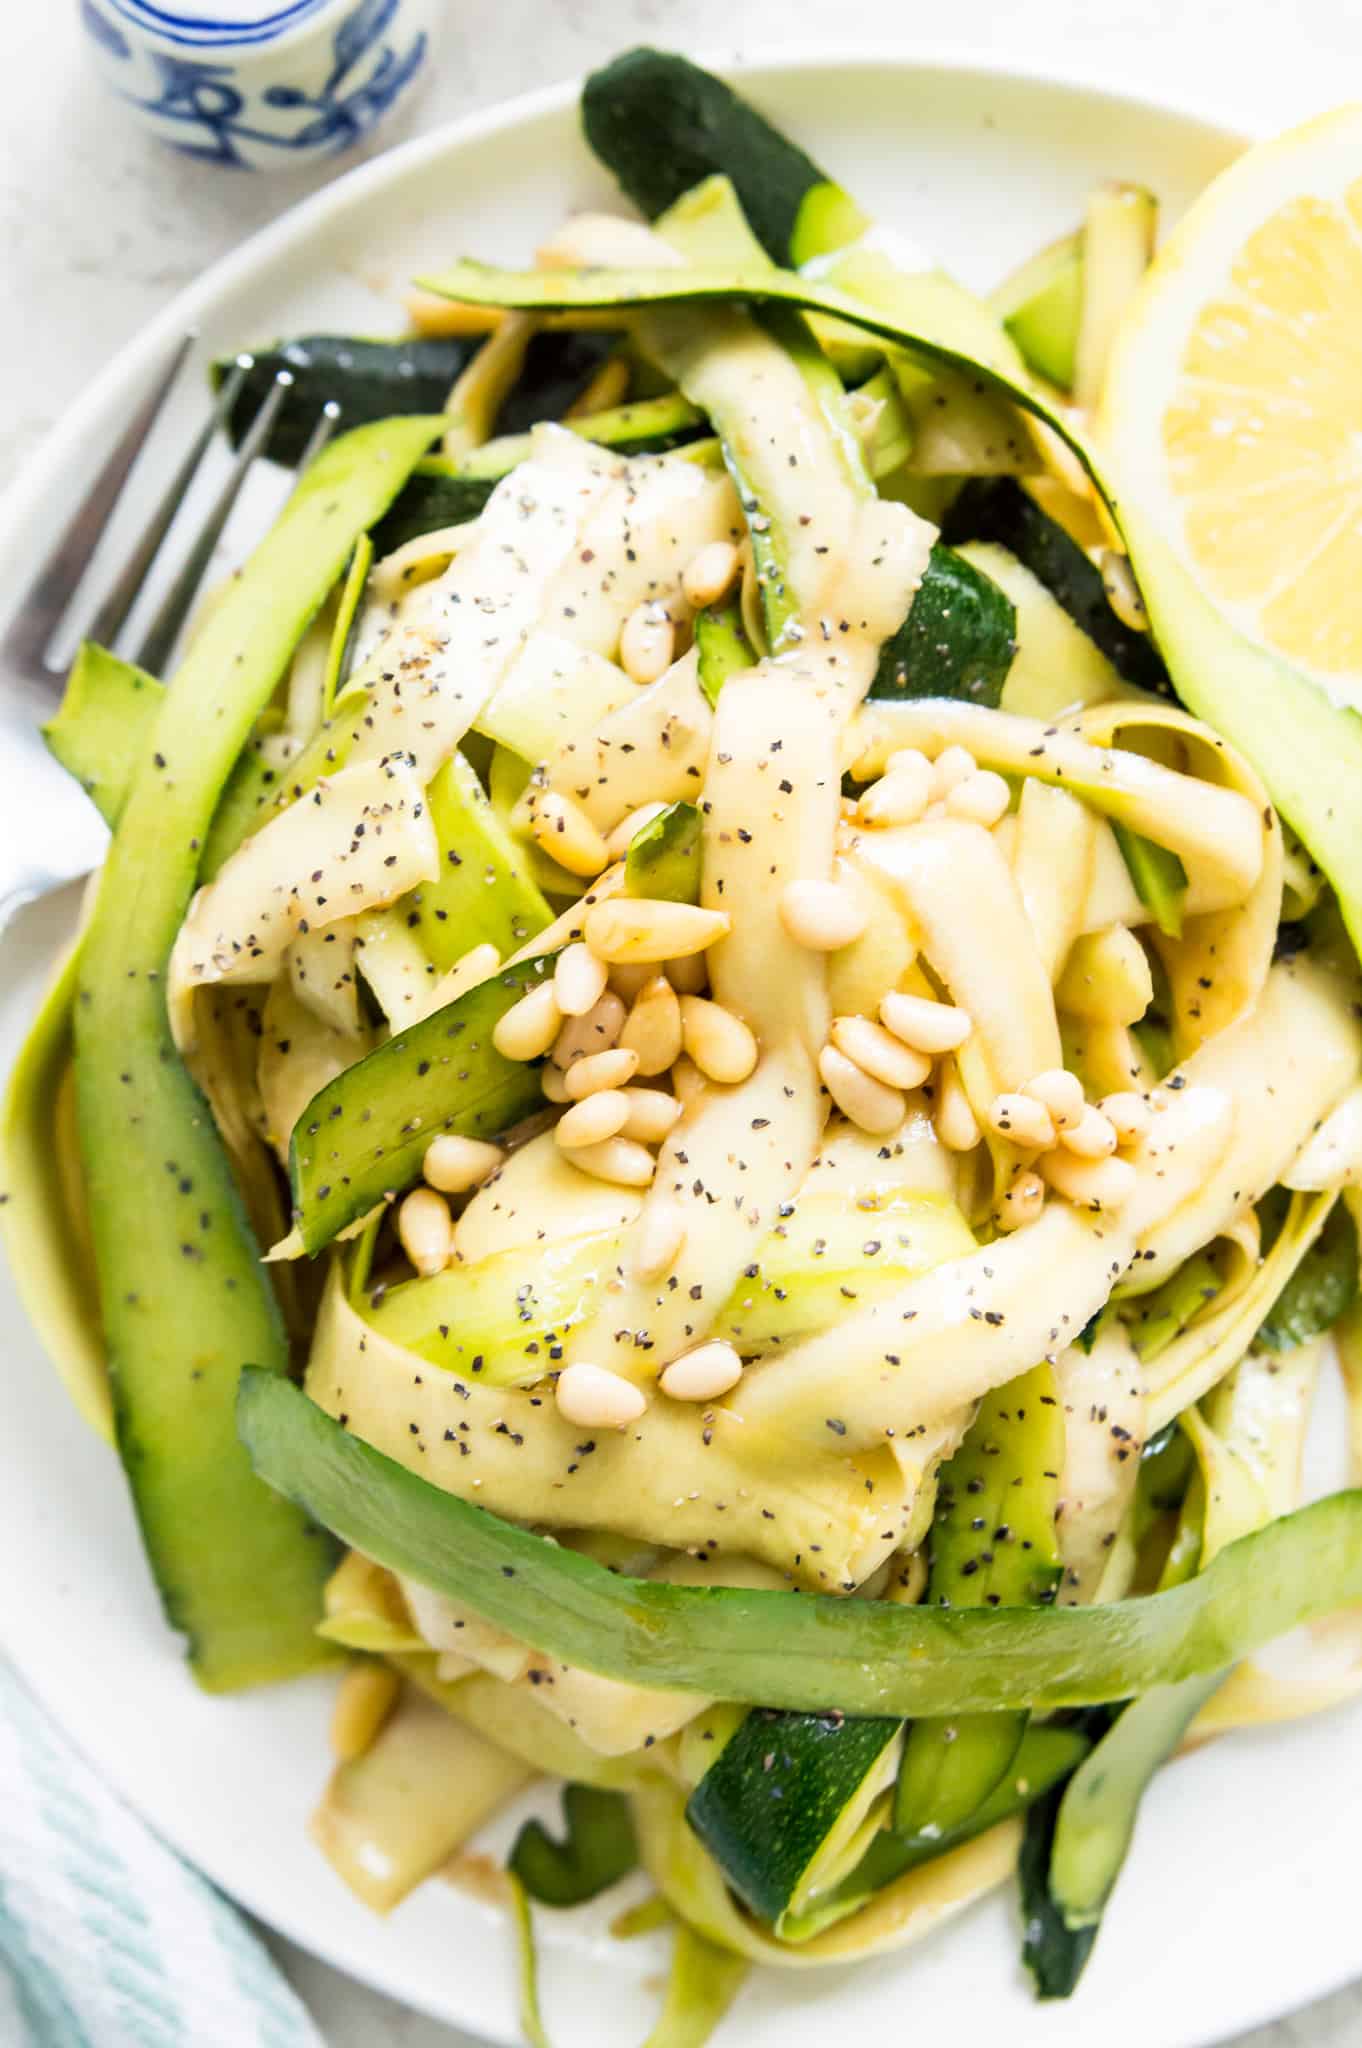 A raw zucchini salad on a plate topped with pine nuts